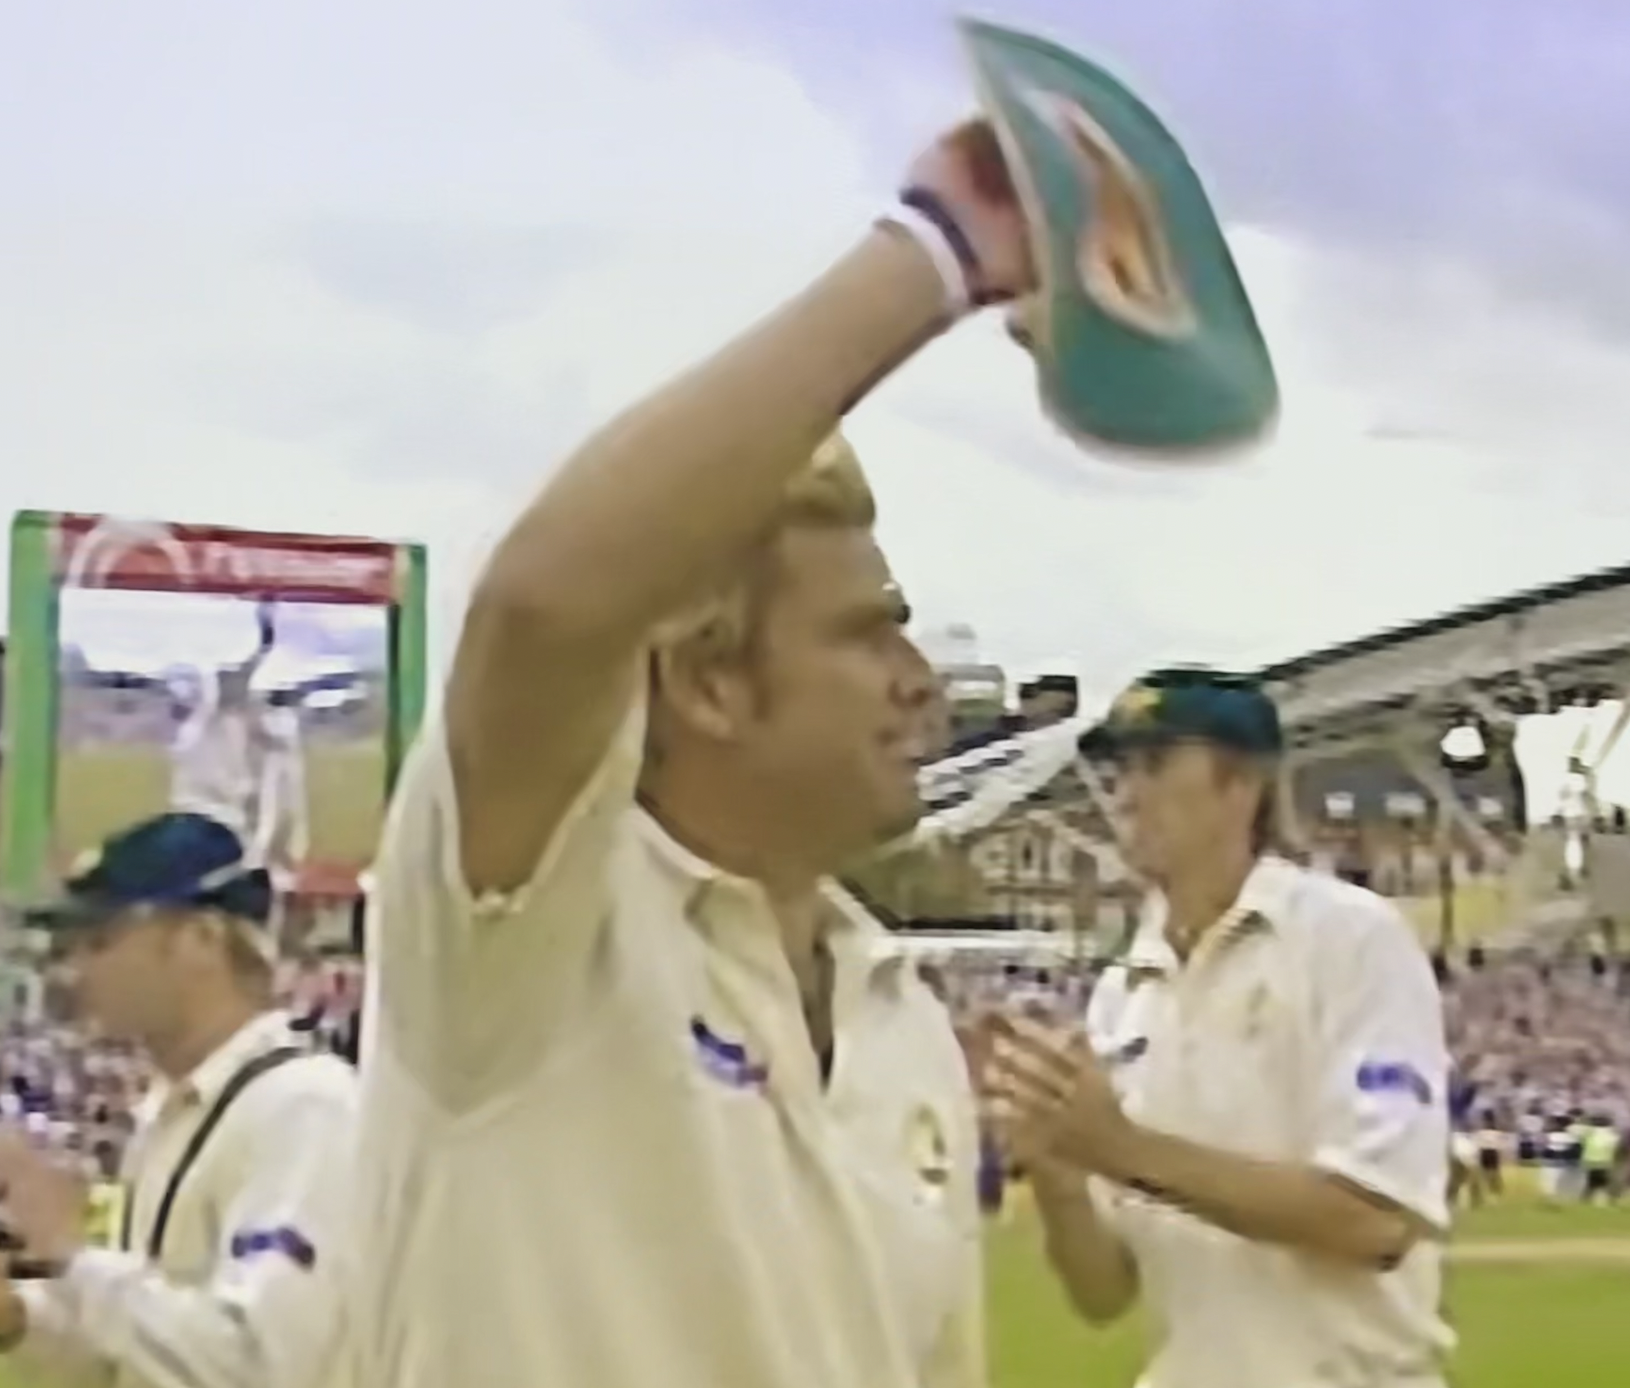 Shane Warne after bowling out Mike Gatting with the bowl of the century.